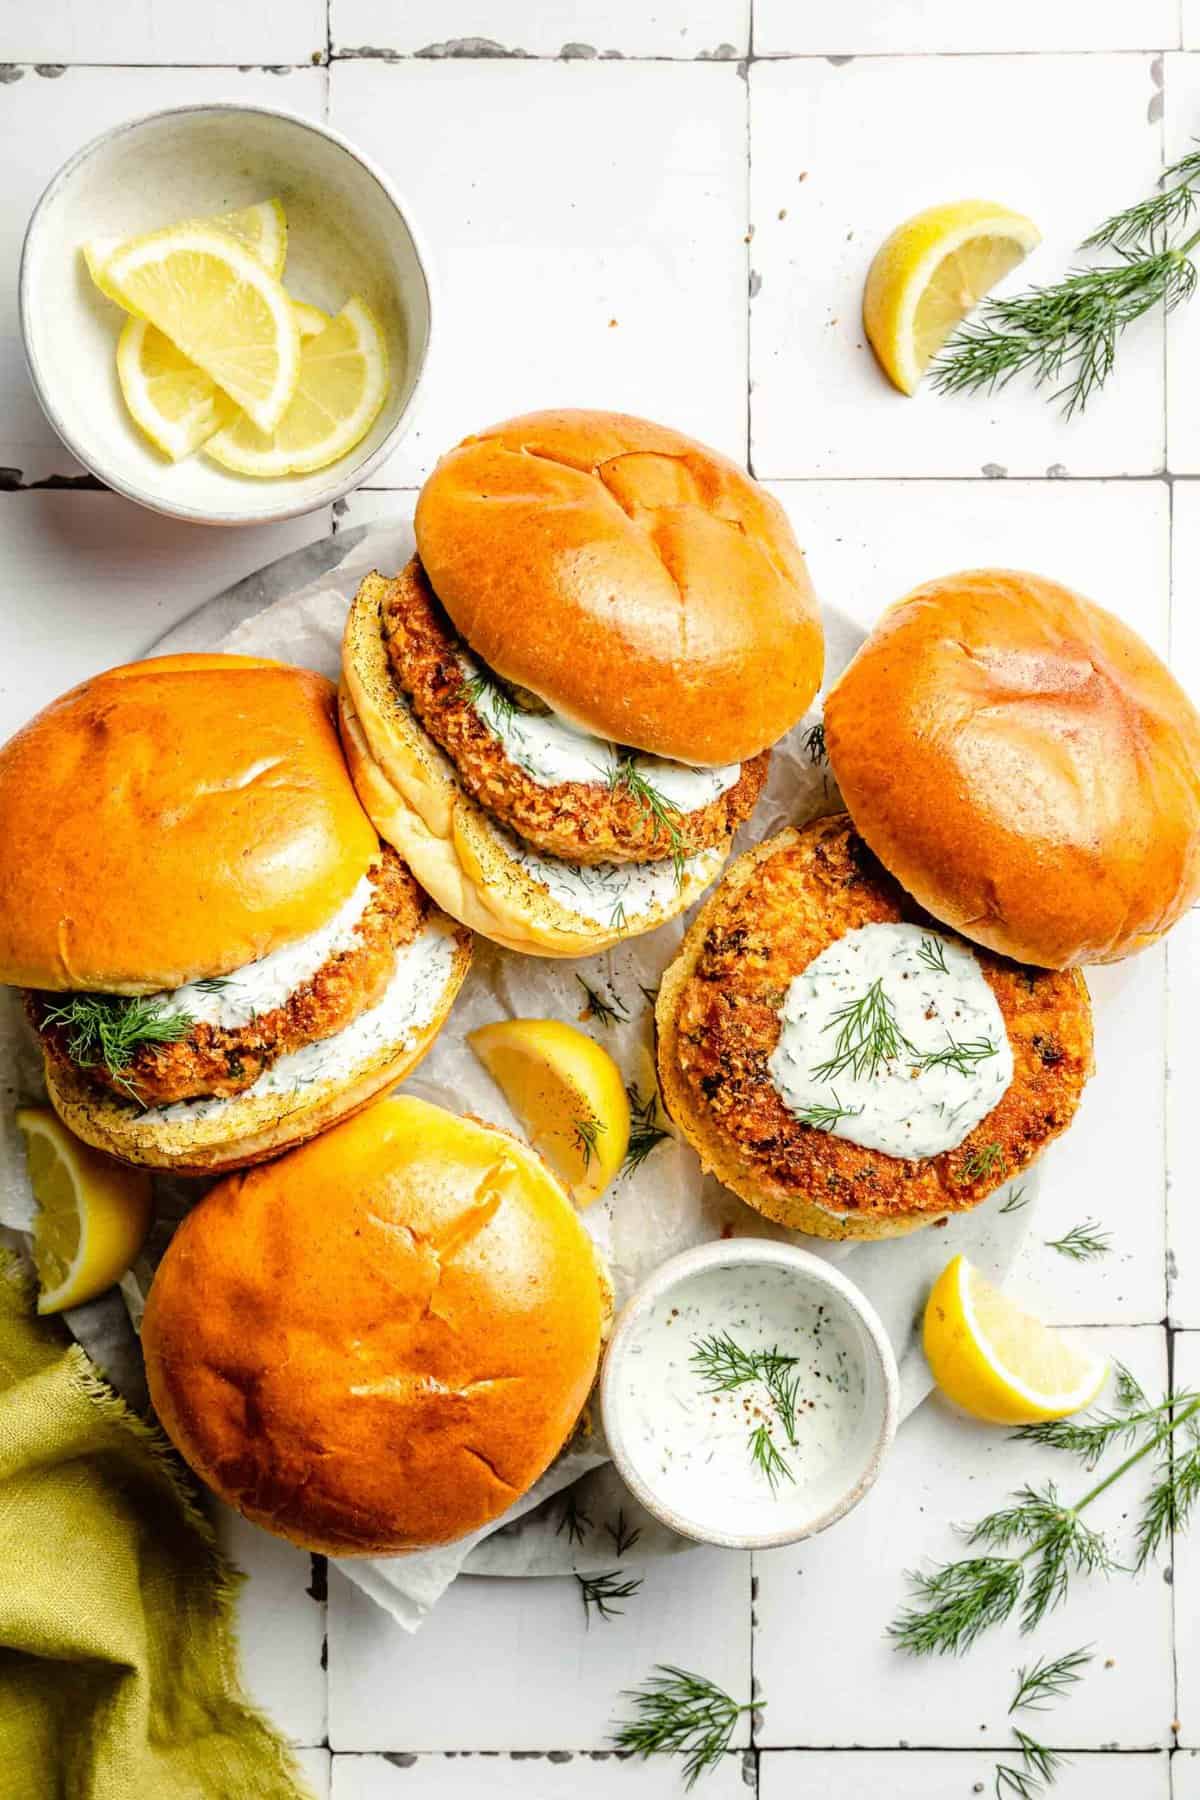 How to Cook Frozen Salmon Burgers (Oven, Air Fryer, Skillet) - Just Cook